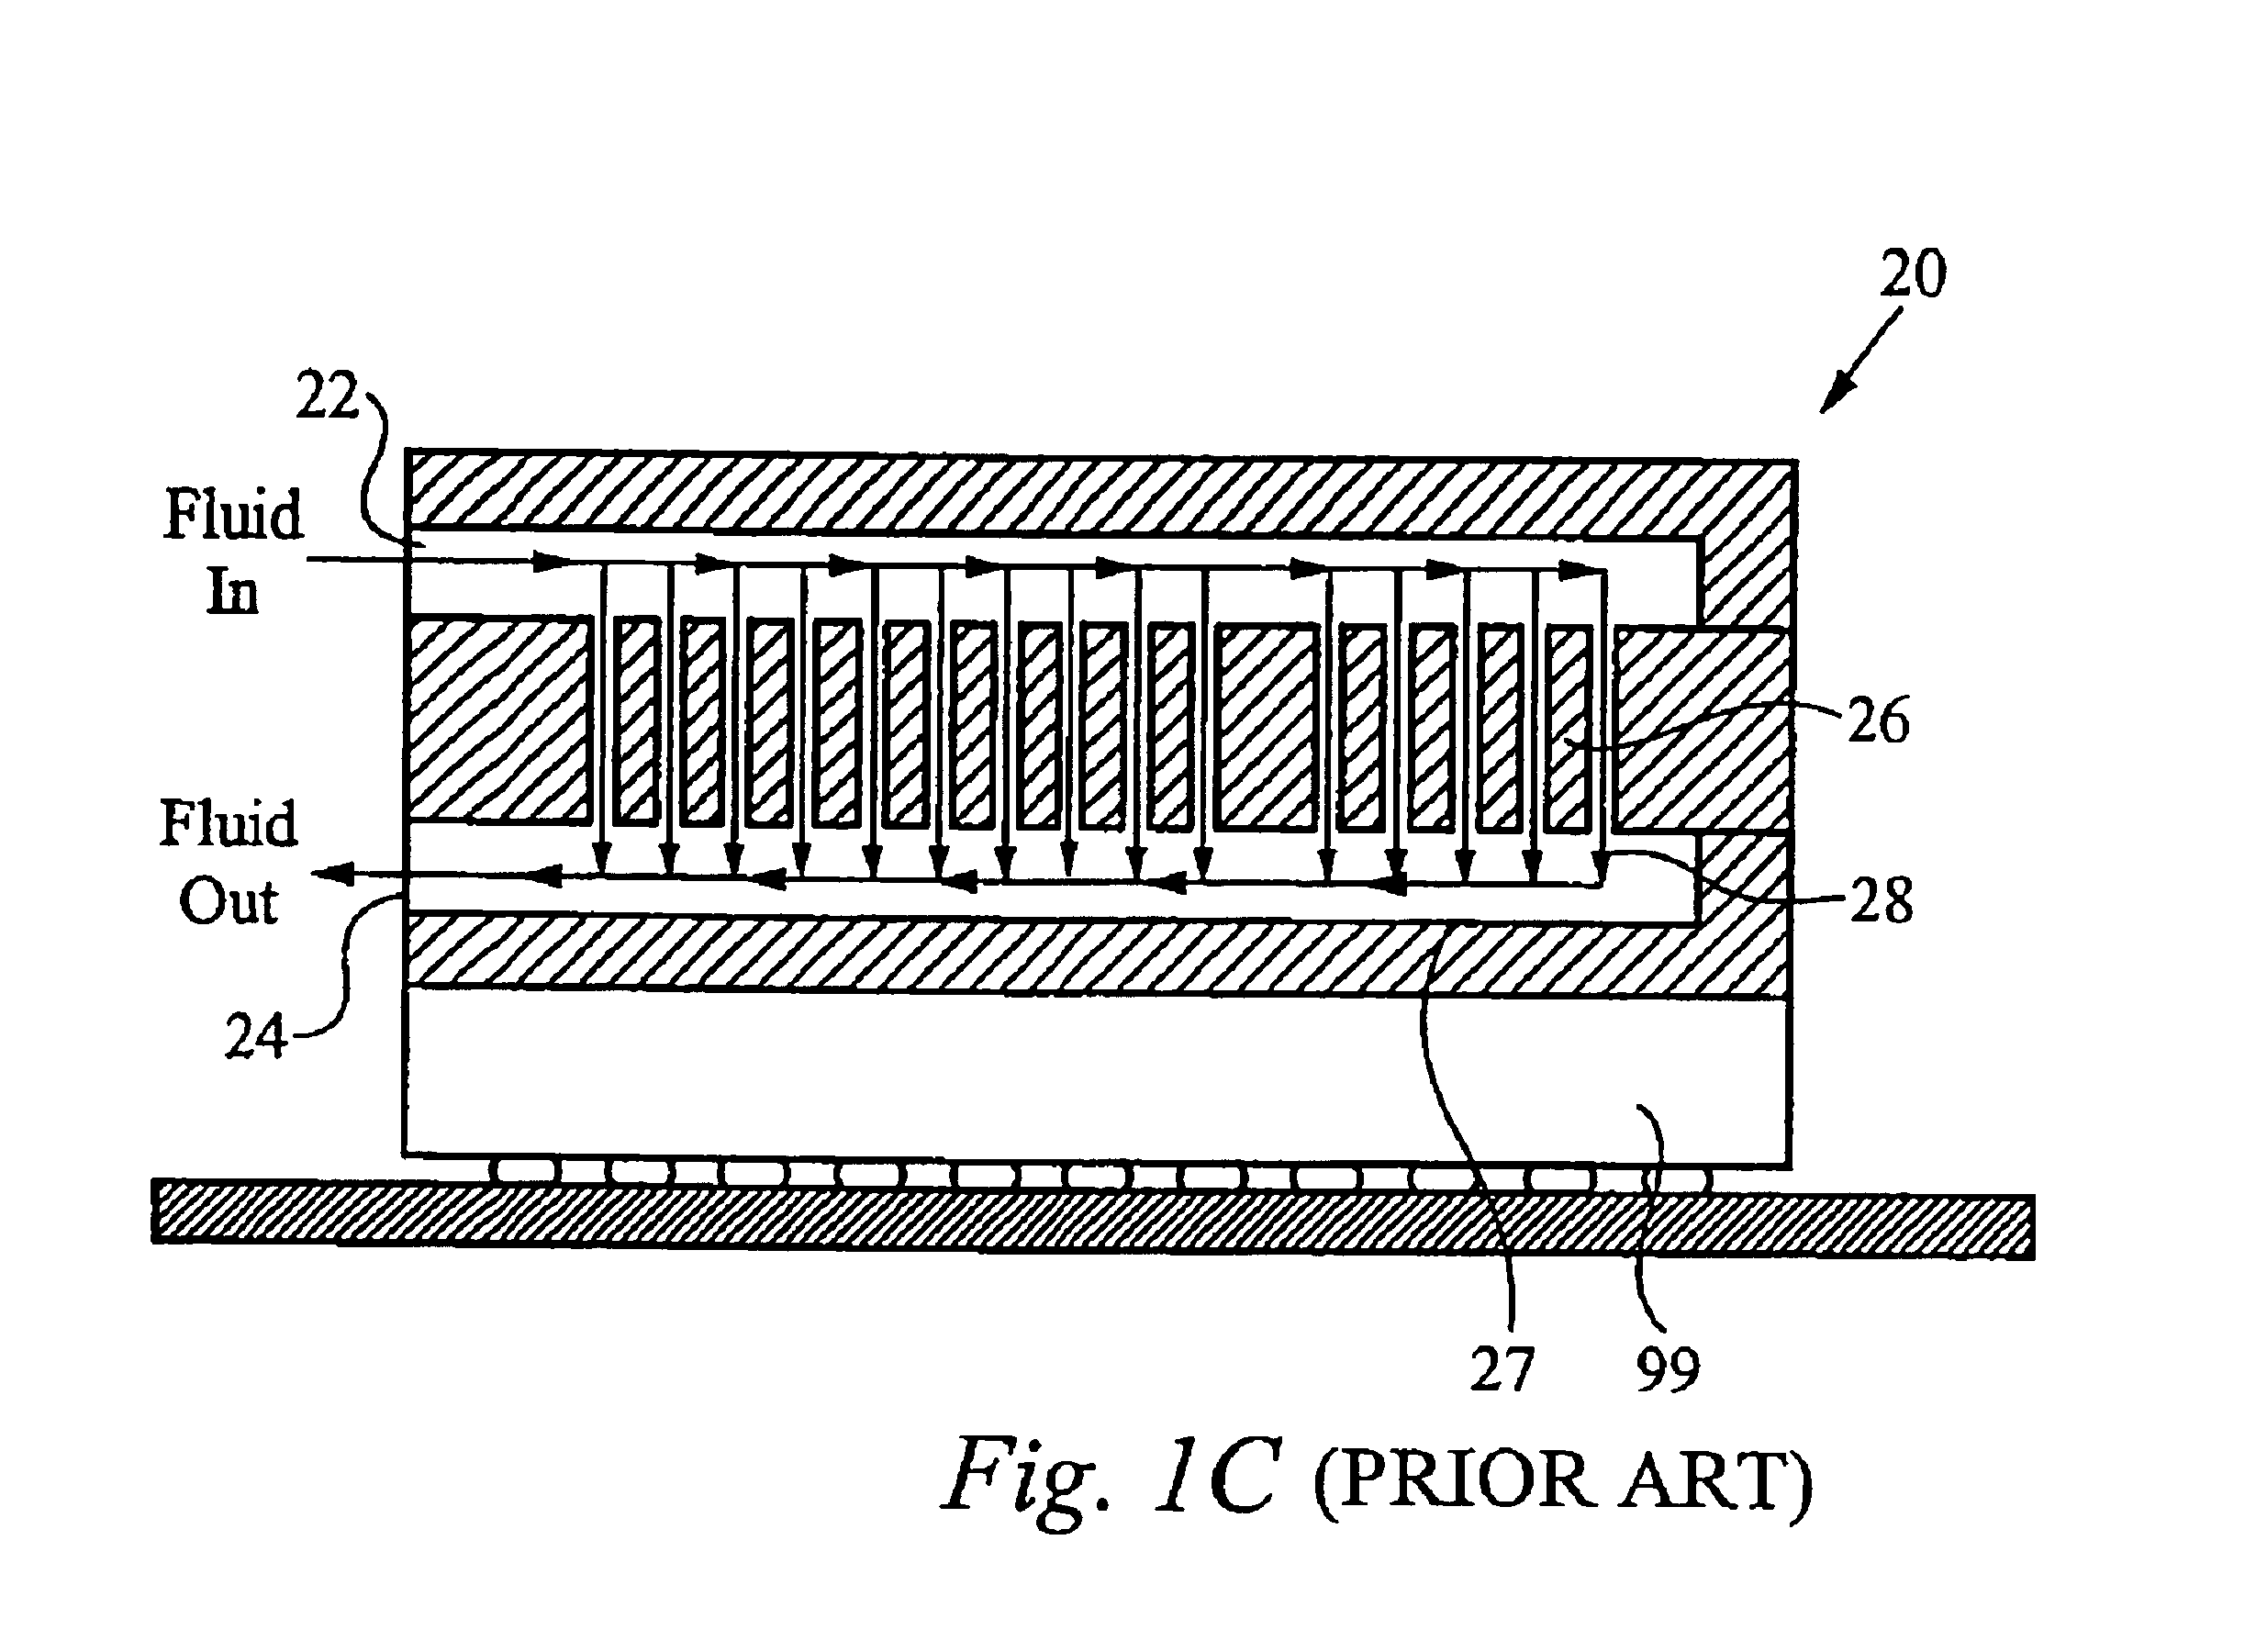 Method and apparatus for efficient vertical fluid delivery for cooling a heat producing device